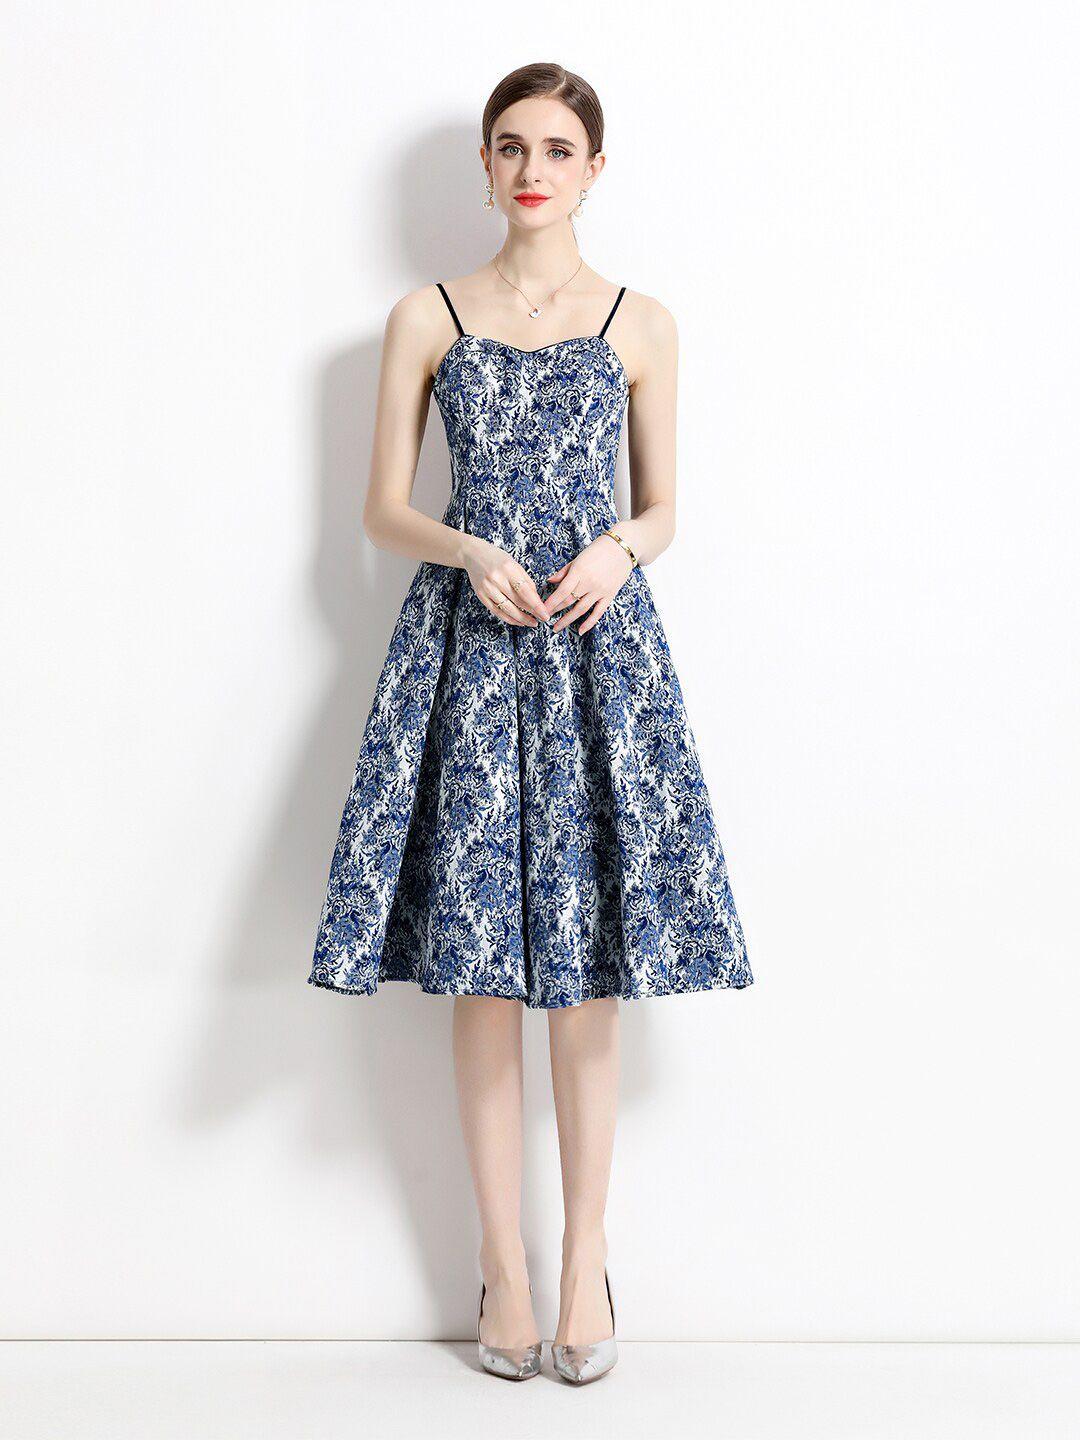 jc collection floral print fit &flare dress